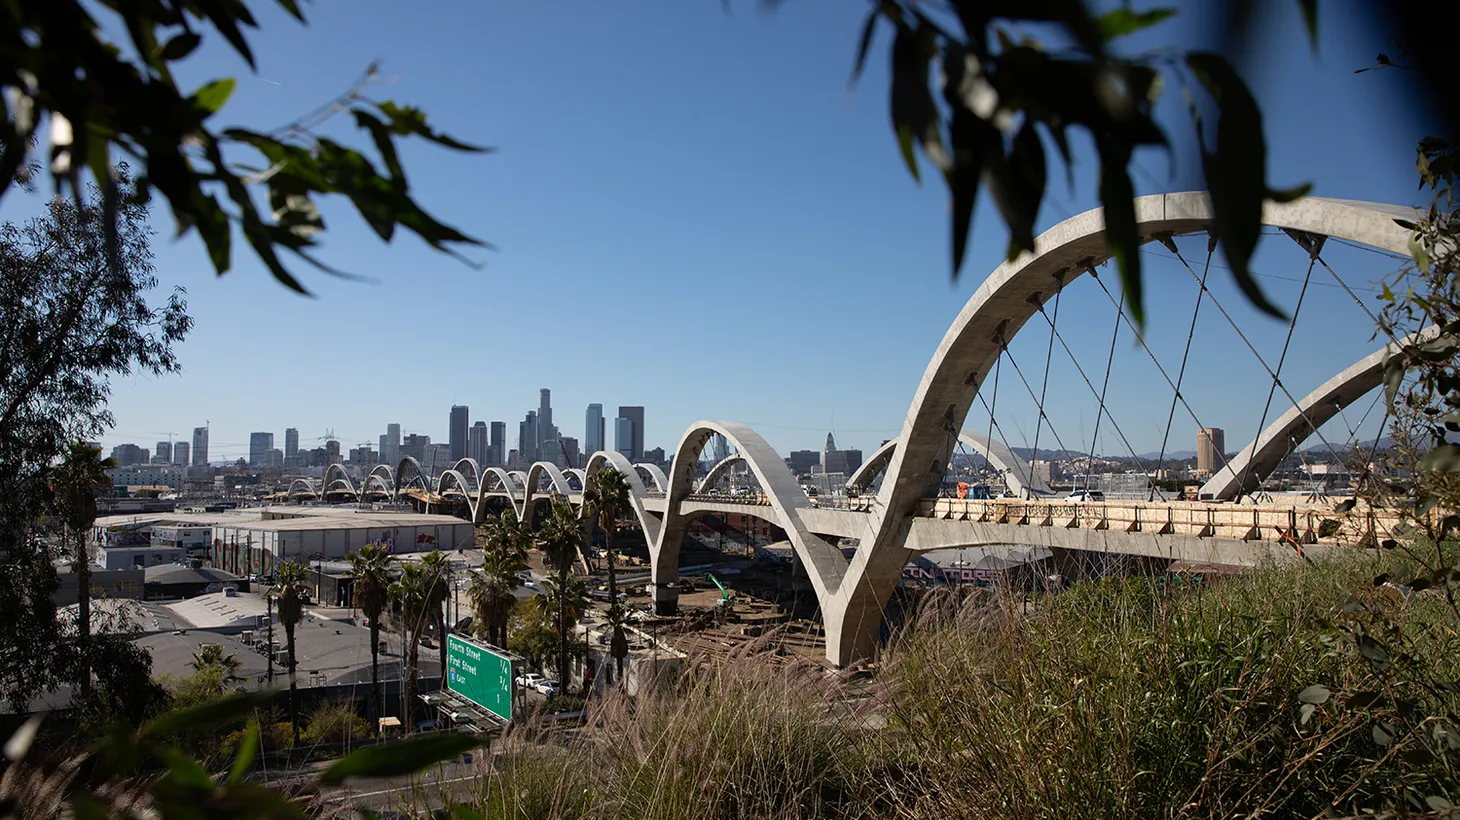 A view from Boyle Heights shows the new Sixth Street Viaduct and its view of downtown Los Angeles.